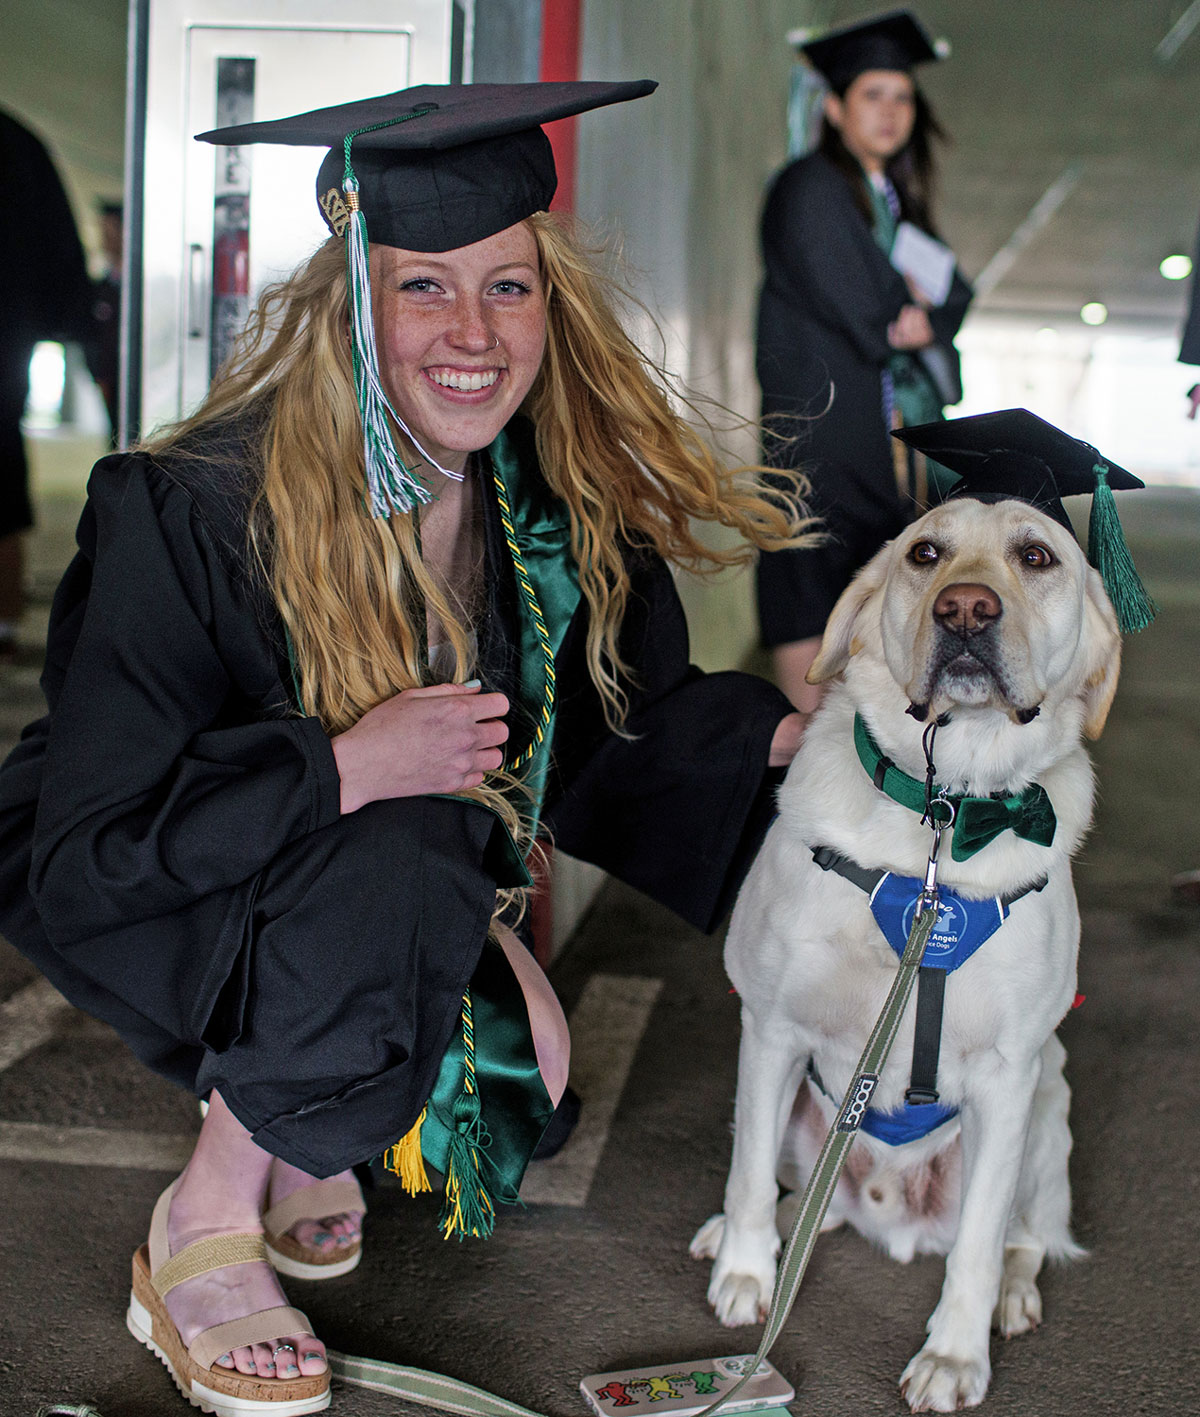 Graduate posing with her service dog